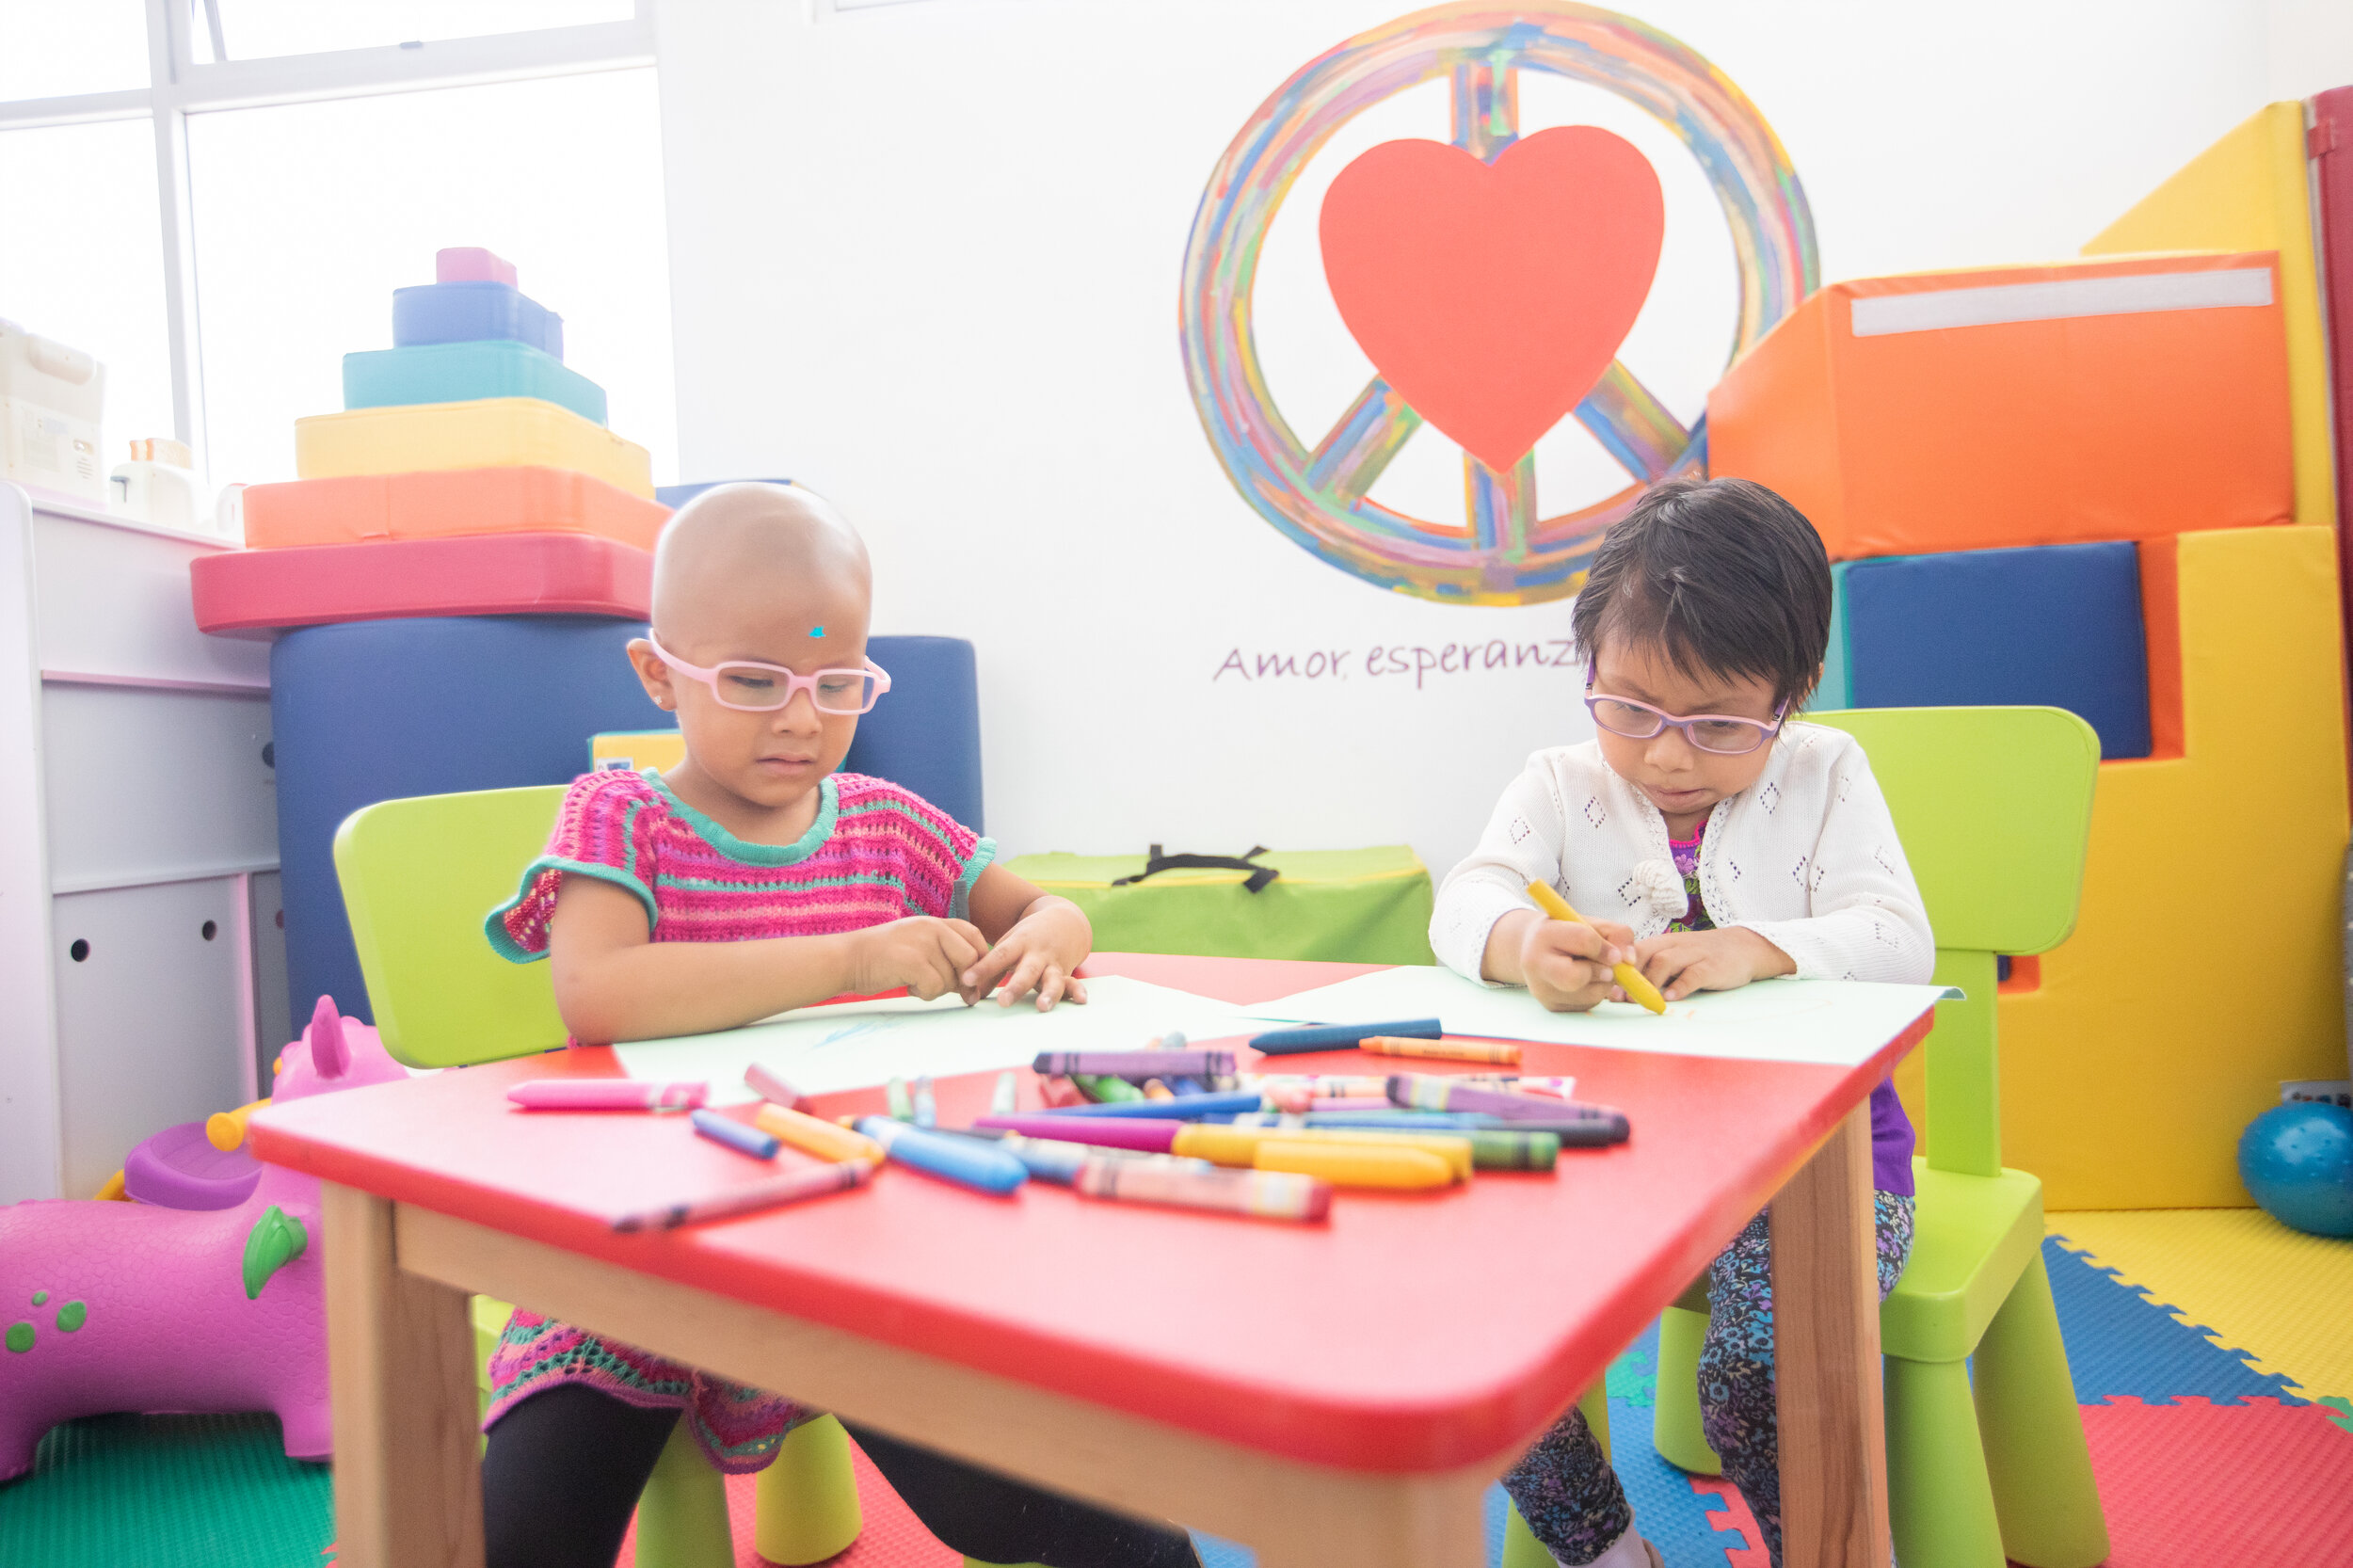  The Mexican nonprofit Casa de la Amistad provides shelter, transportation, food and medications for children from low-income families with cancer. The organization has been working with Microsoft technology for years. In 2017, Casa de la Amistad’s l